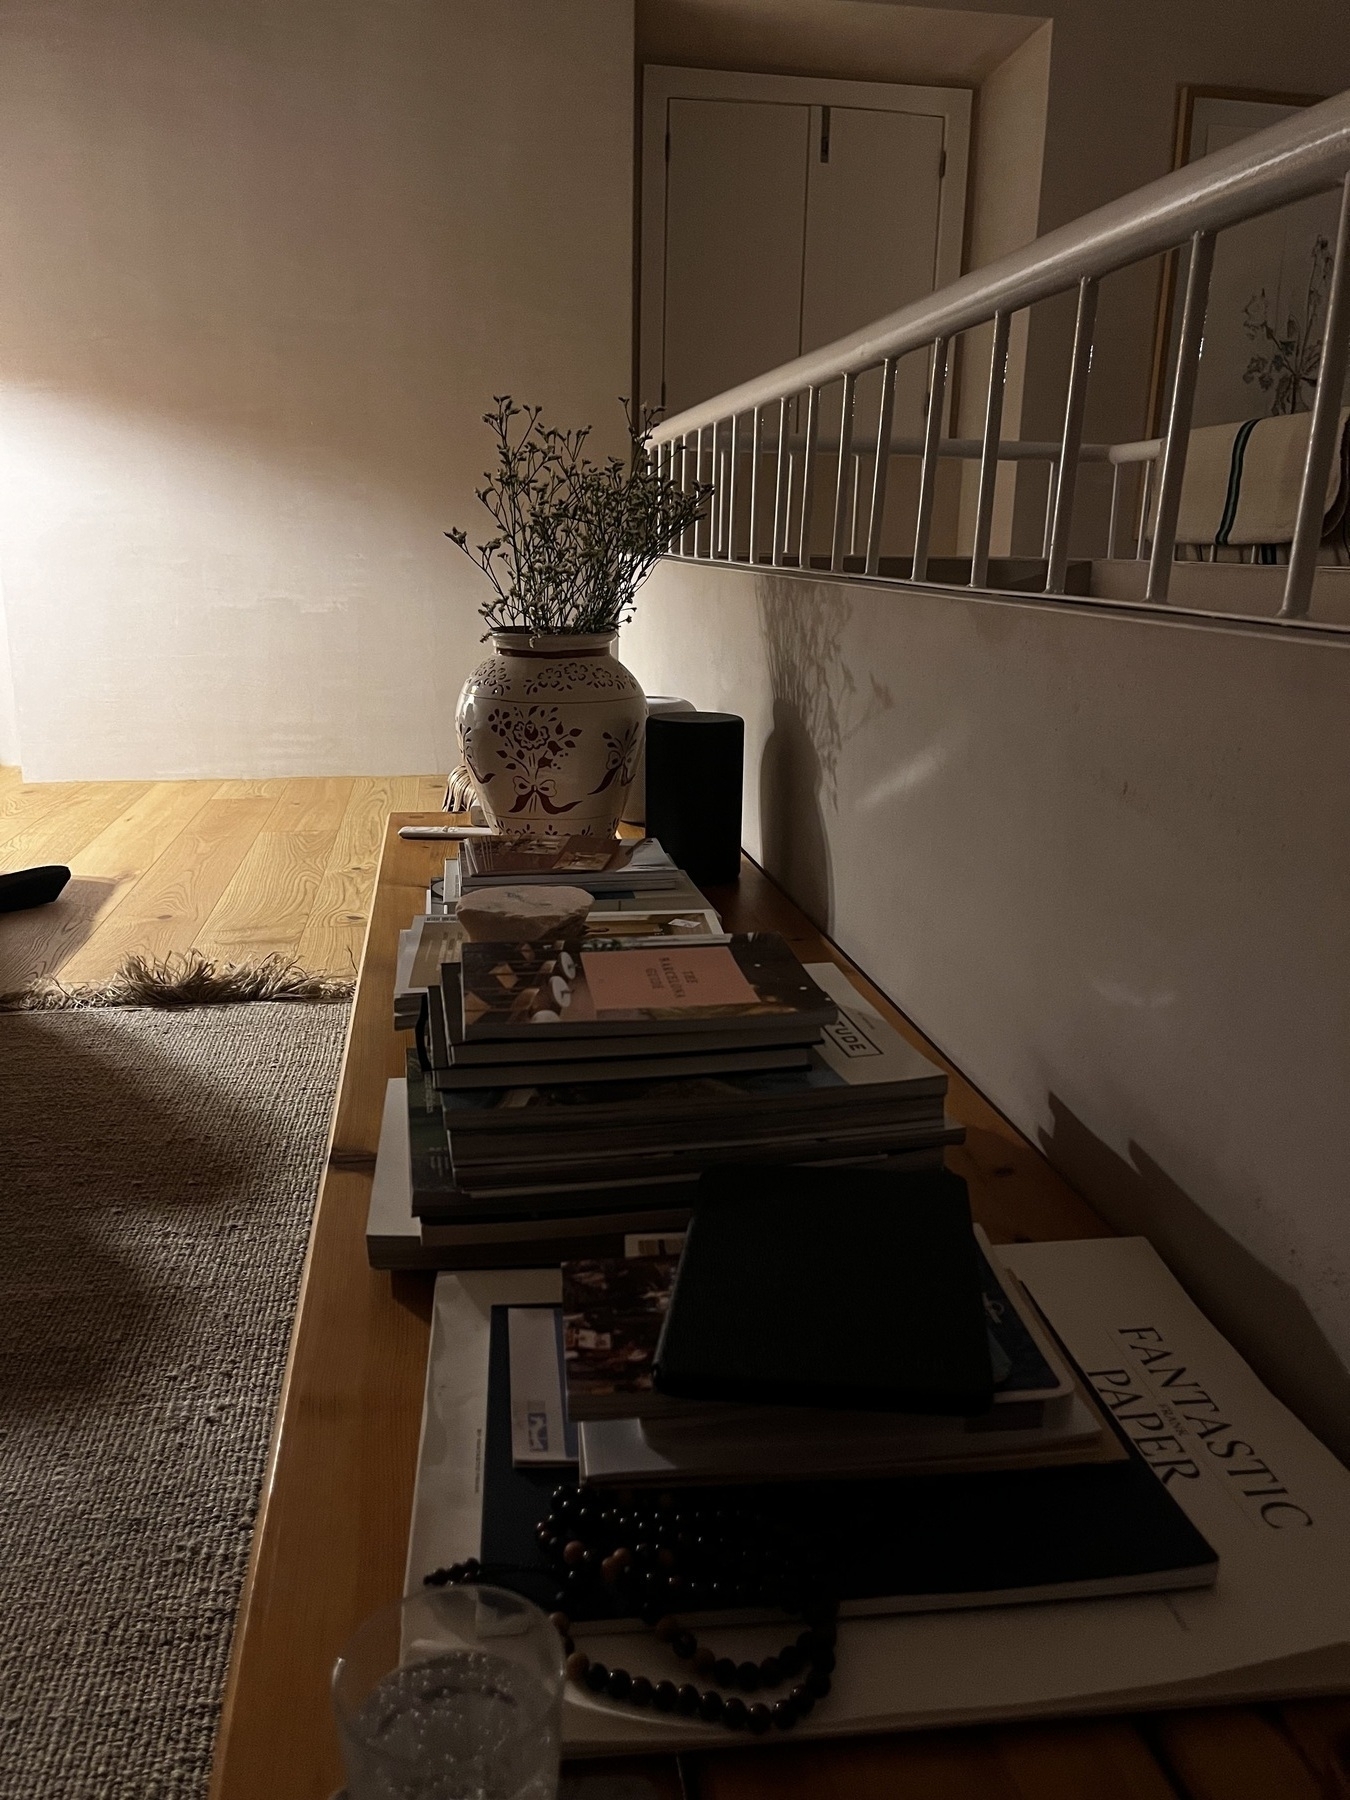 A nighttime scene in a house. A bench with books and a vase of flowers, alongside a low wall and railings. A shuttered window behind and light from the side.